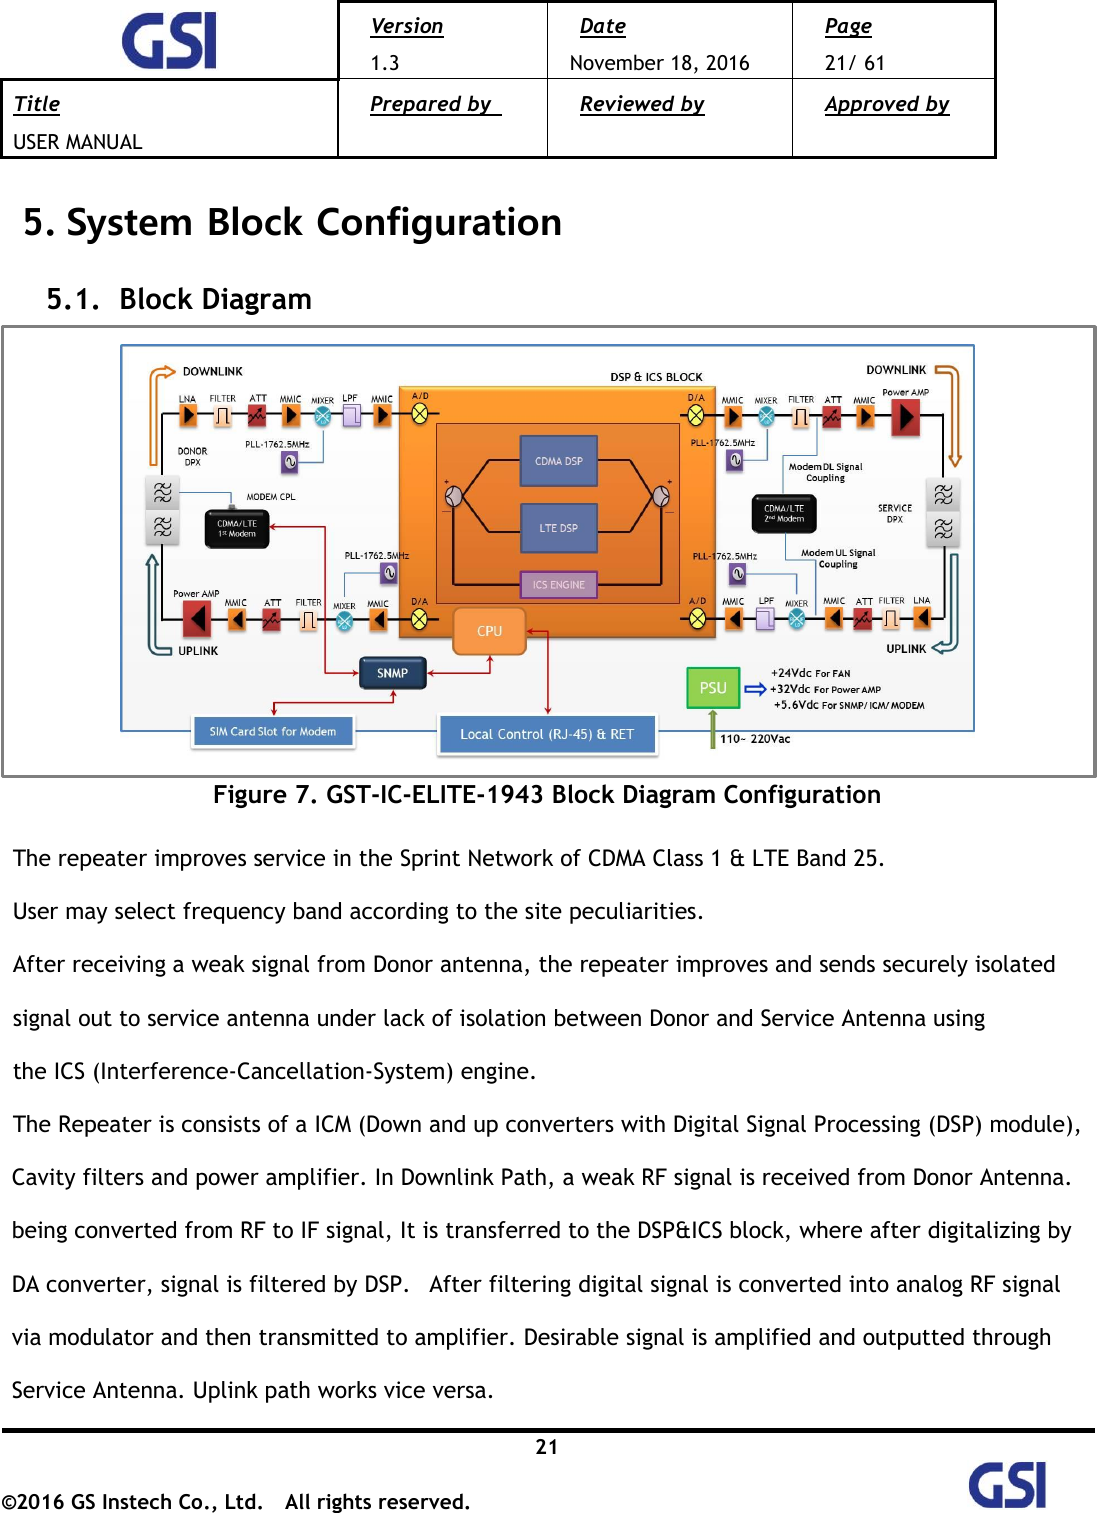  Version 1.3 Date November 18, 2016 Page 21/ 61 Title USER MANUAL Prepared by   Reviewed by  Approved by   21 ©2016 GS Instech Co., Ltd.  All rights reserved.   5. System Block Configuration 5.1.   Block Diagram    Figure 7. GST-IC-ELITE-1943 Block Diagram Configuration  The repeater improves service in the Sprint Network of CDMA Class 1 &amp; LTE Band 25. User may select frequency band according to the site peculiarities.   After receiving a weak signal from Donor antenna, the repeater improves and sends securely isolated signal out to service antenna under lack of isolation between Donor and Service Antenna using the ICS (Interference-Cancellation-System) engine. The Repeater is consists of a ICM (Down and up converters with Digital Signal Processing (DSP) module), Cavity filters and power amplifier. In Downlink Path, a weak RF signal is received from Donor Antenna. being converted from RF to IF signal, It is transferred to the DSP&amp;ICS block, where after digitalizing by DA converter, signal is filtered by DSP.   After filtering digital signal is converted into analog RF signal via modulator and then transmitted to amplifier. Desirable signal is amplified and outputted through Service Antenna. Uplink path works vice versa.   